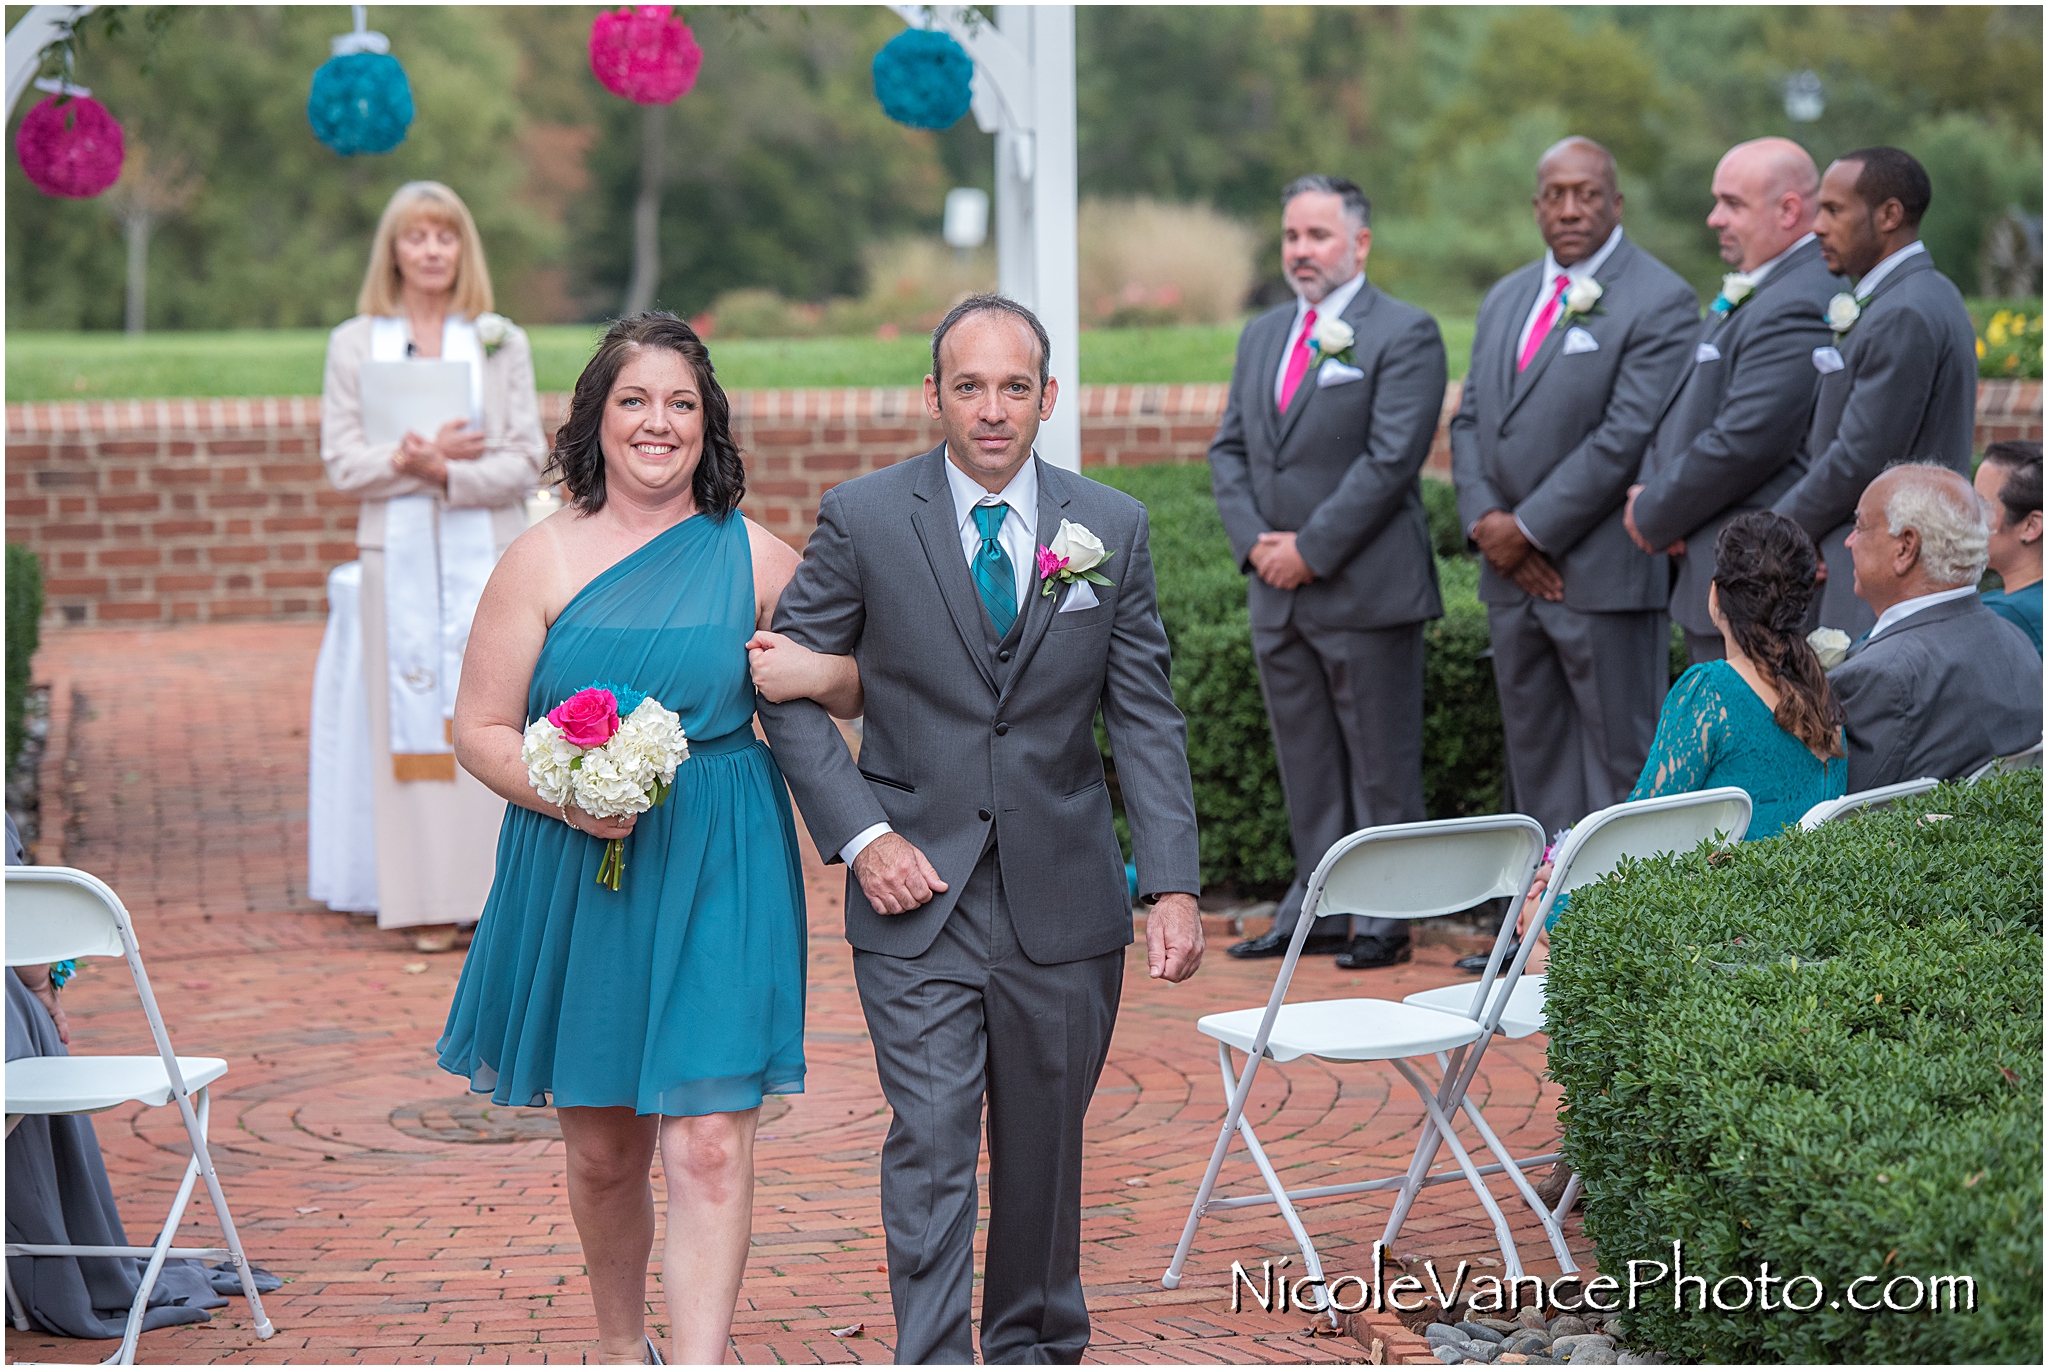 The wedding party exits the ceremony at Virginia Crossings.